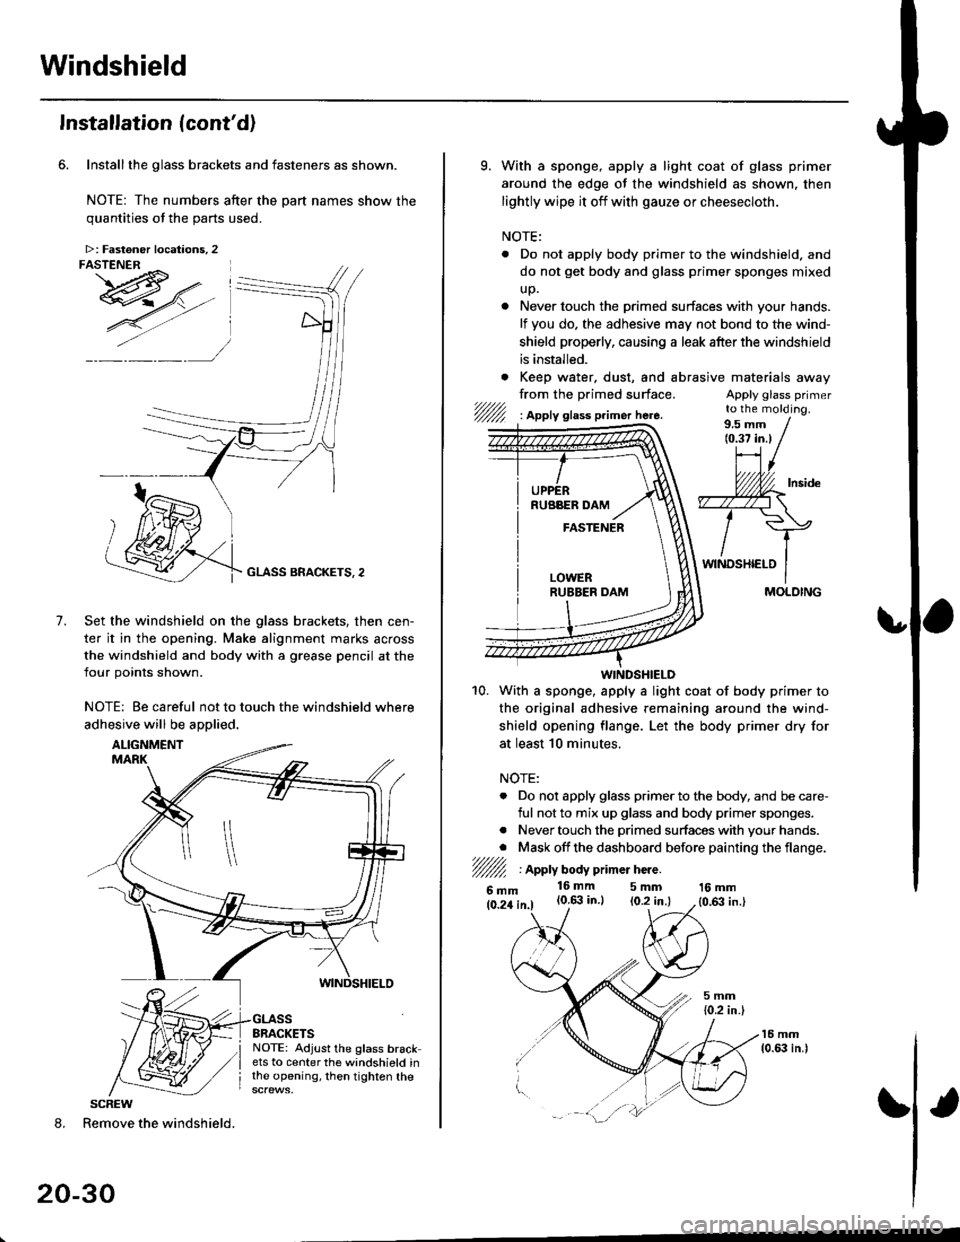 HONDA CIVIC 1996 6.G Workshop Manual Windshield
Installation (contd)
Installthe glass brackets and fasteners as shown.
NOTE: The numbers after the part names show thequantities of the oarts used.
GLASS BRACKETS, 2
Set the windshield on 